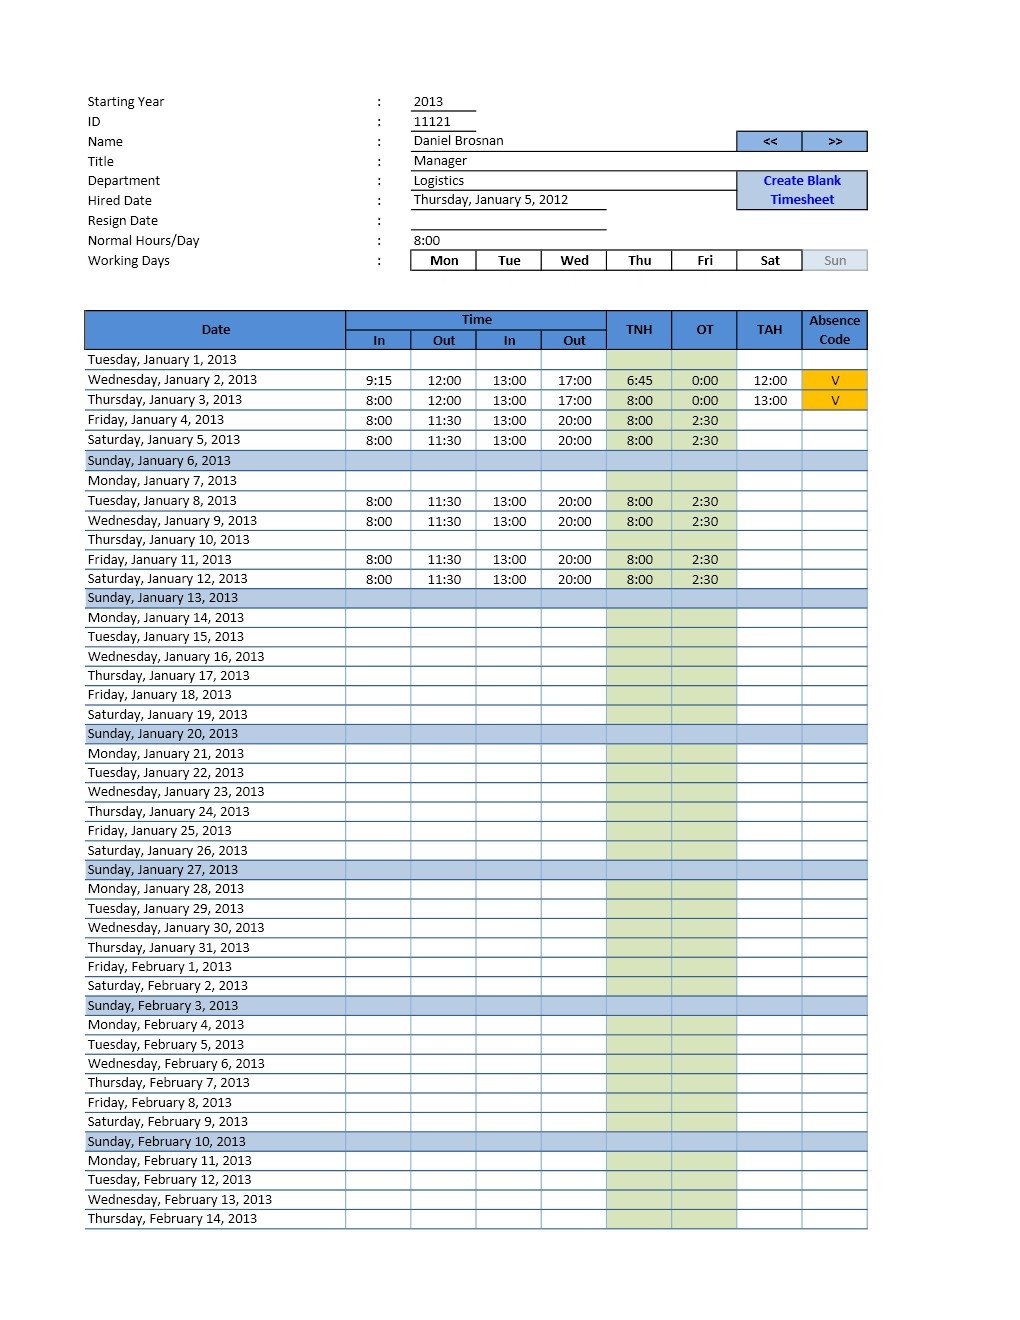 Employee Attendance Calendar And Vacation Planner Spreadsheets for Printable Employee Attendance Calendar Template Excel